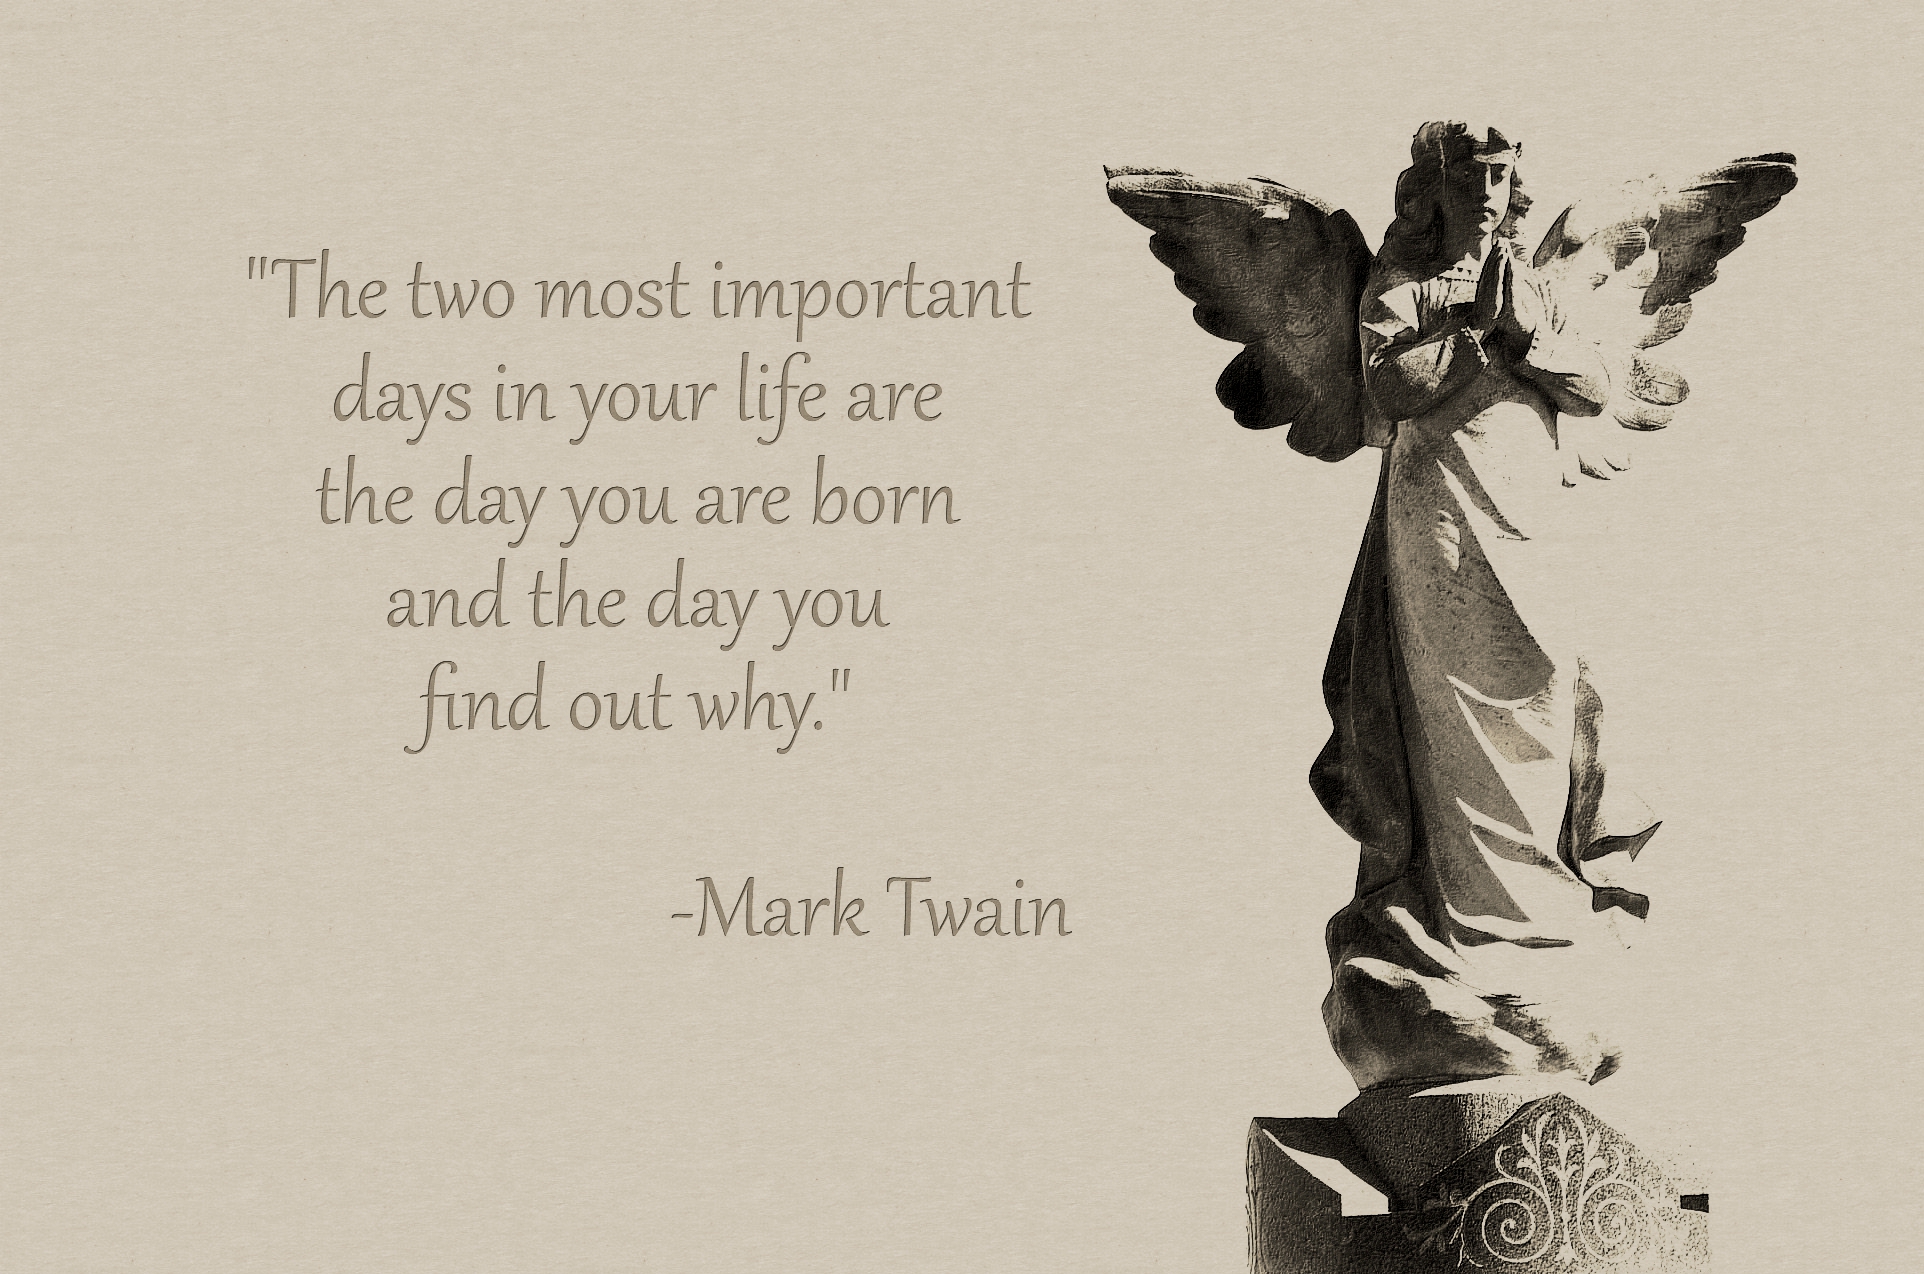 The two most important days in your life - Mark Twain by lonewolf6738